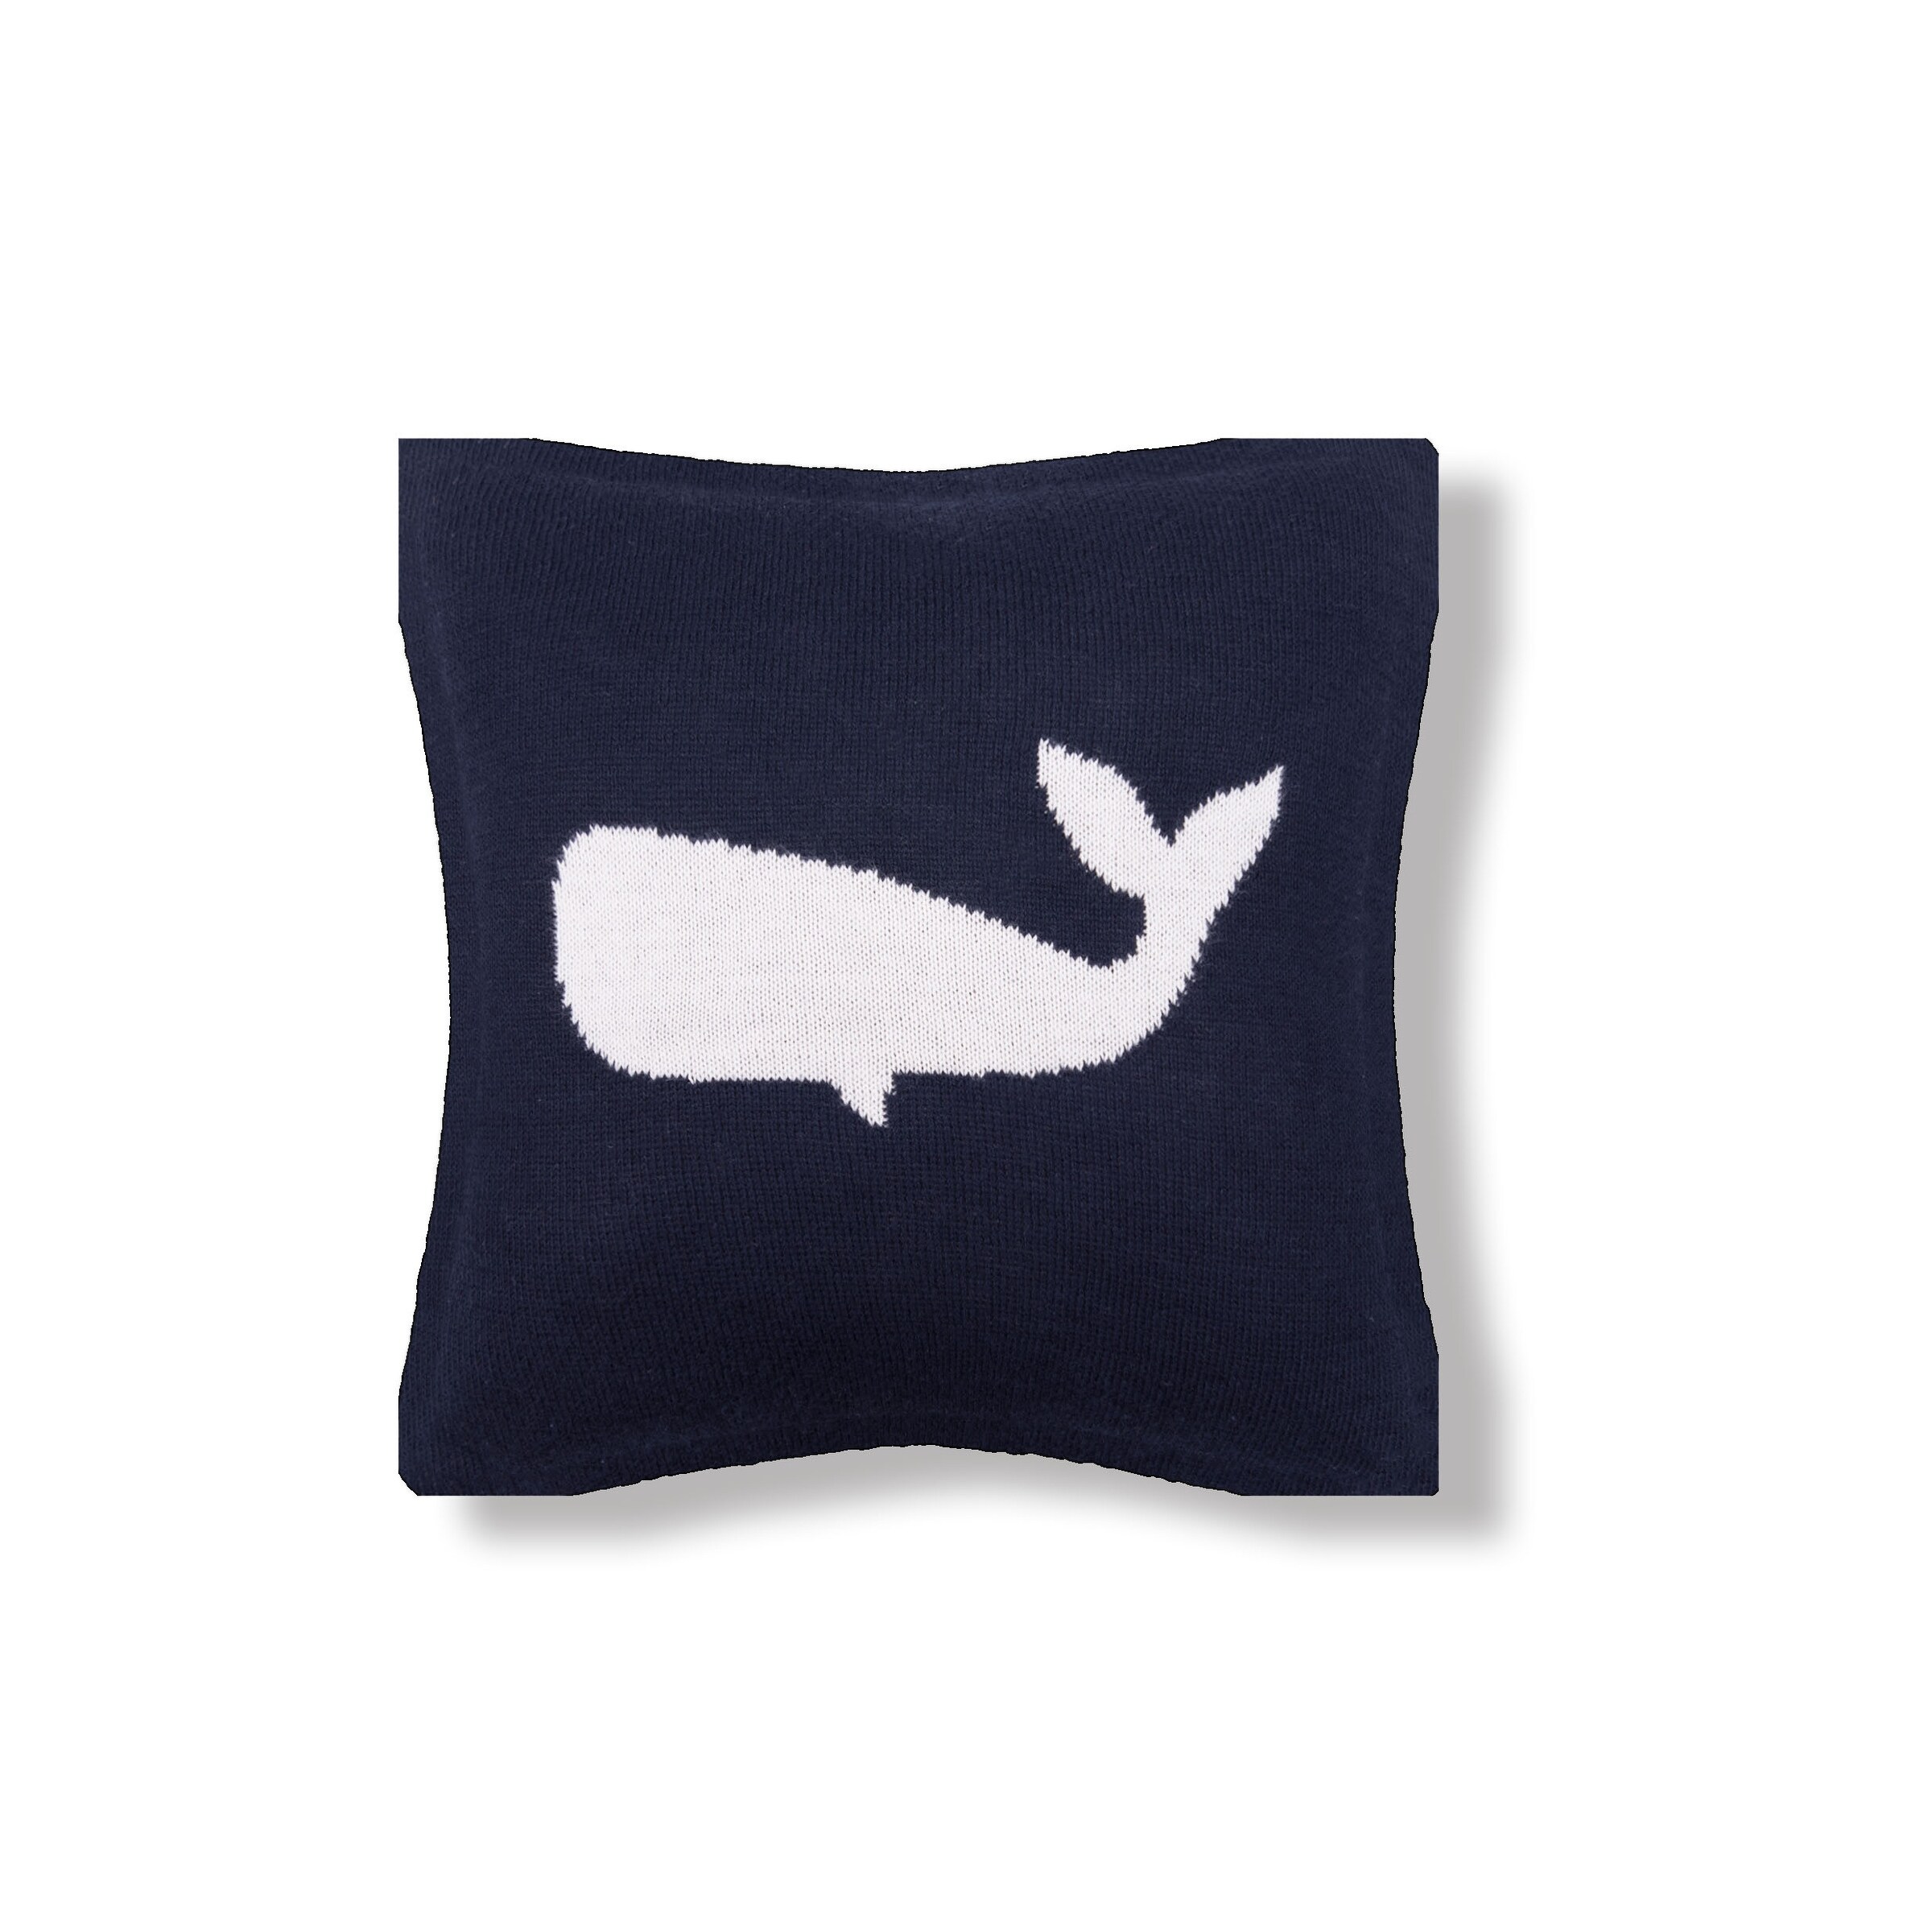 https://ak1.ostkcdn.com/images/products/is/images/direct/87952231ce1abdbffb3ce15d8c4213fc0f4356b6/10%22-x-10%22-Whale-Knitted-Throw-Pillow.jpg